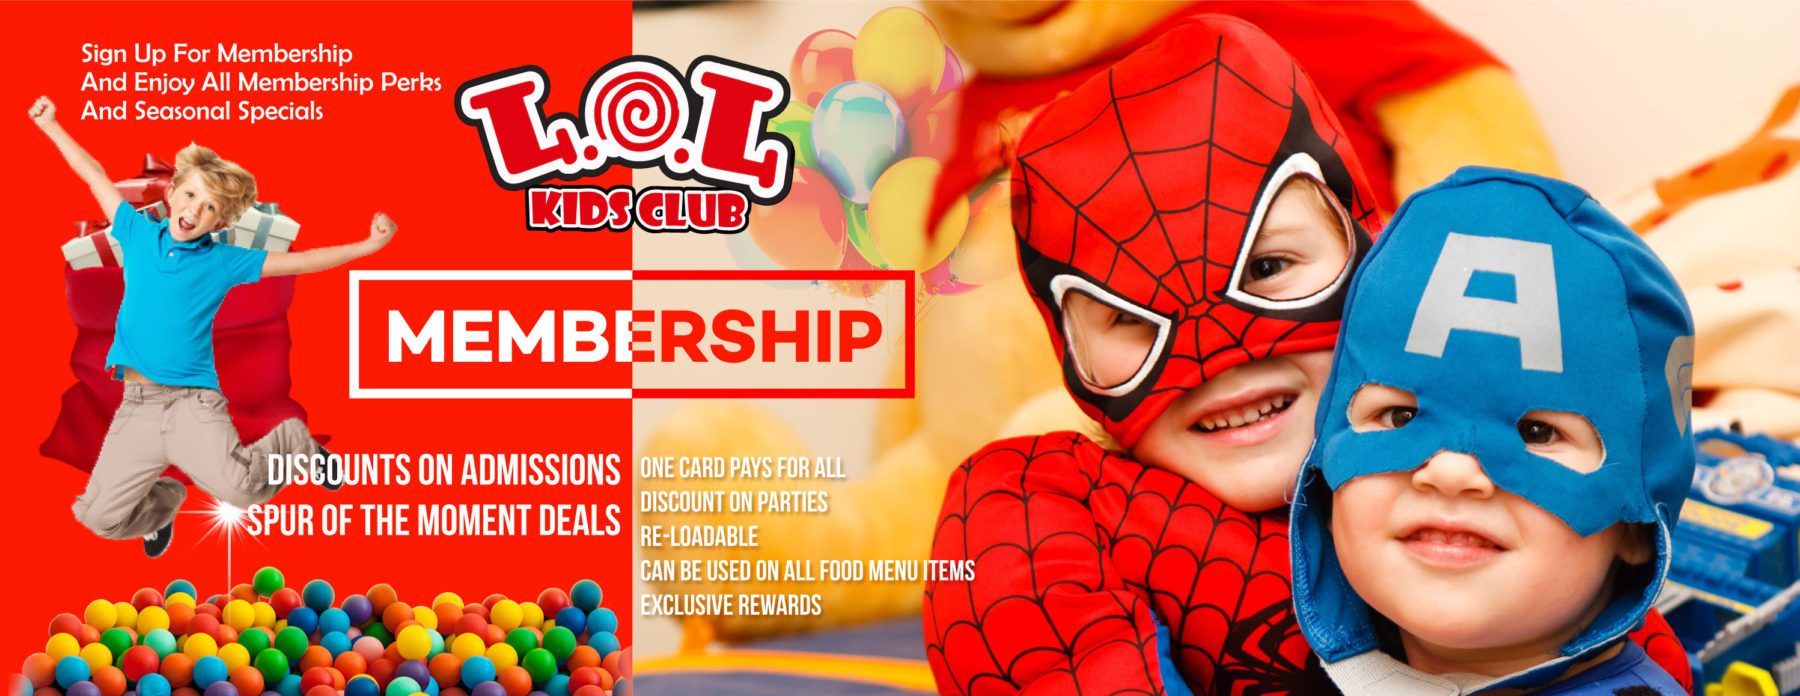 Sign up for LOL Kids Club Membership to save more. For more information please give us a call at 702-613-0388 or email info@lolkidsclub.com